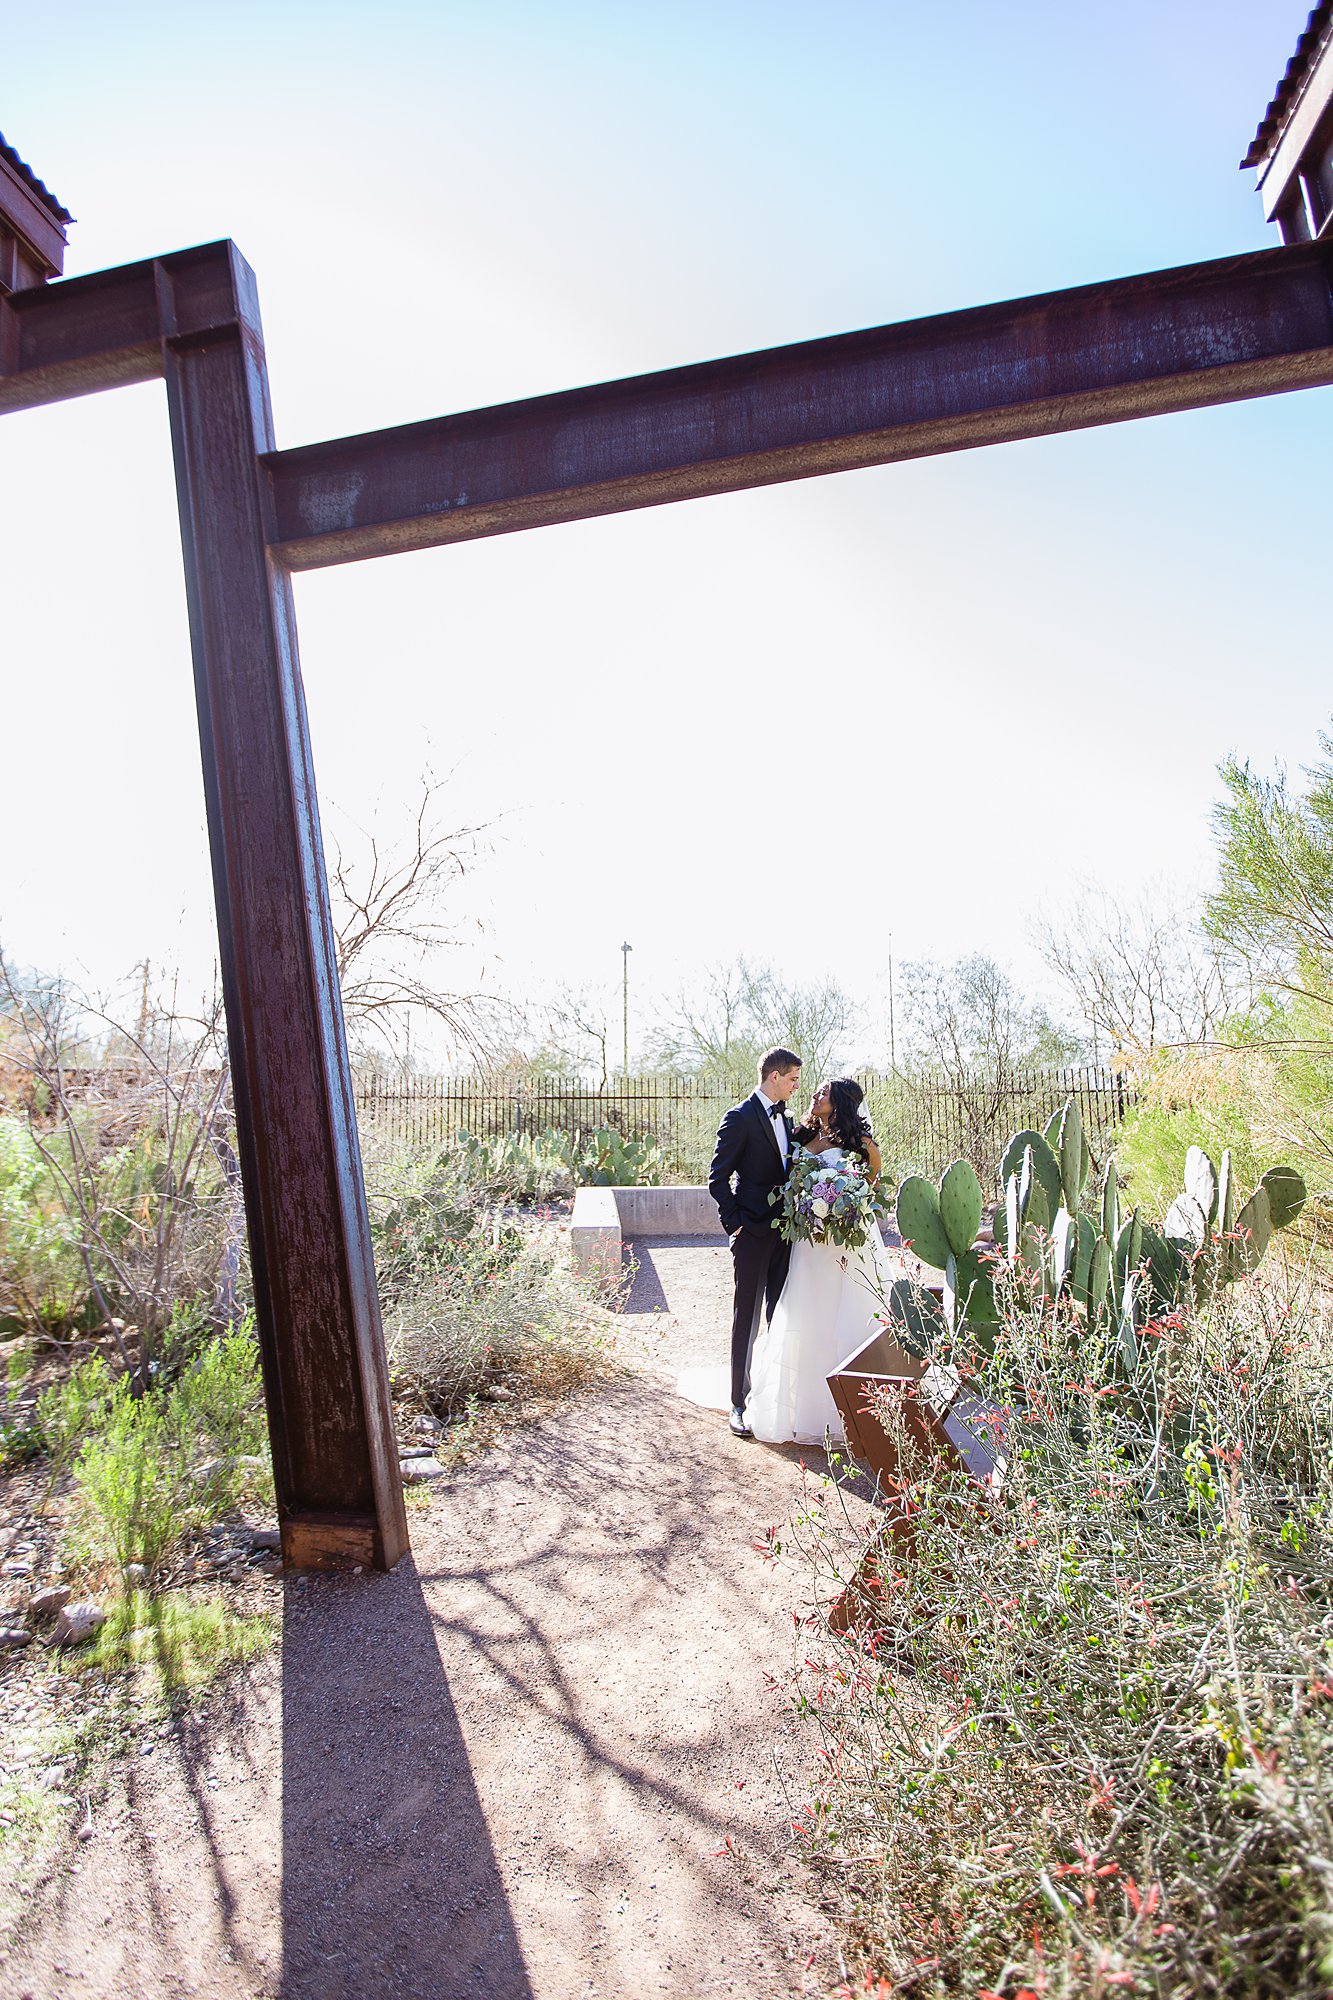 Bride and groom surrounded by the beauty of the winter desert at the Rio Salado Audubon Center by Phoenix wedding photographers PMA Photography.